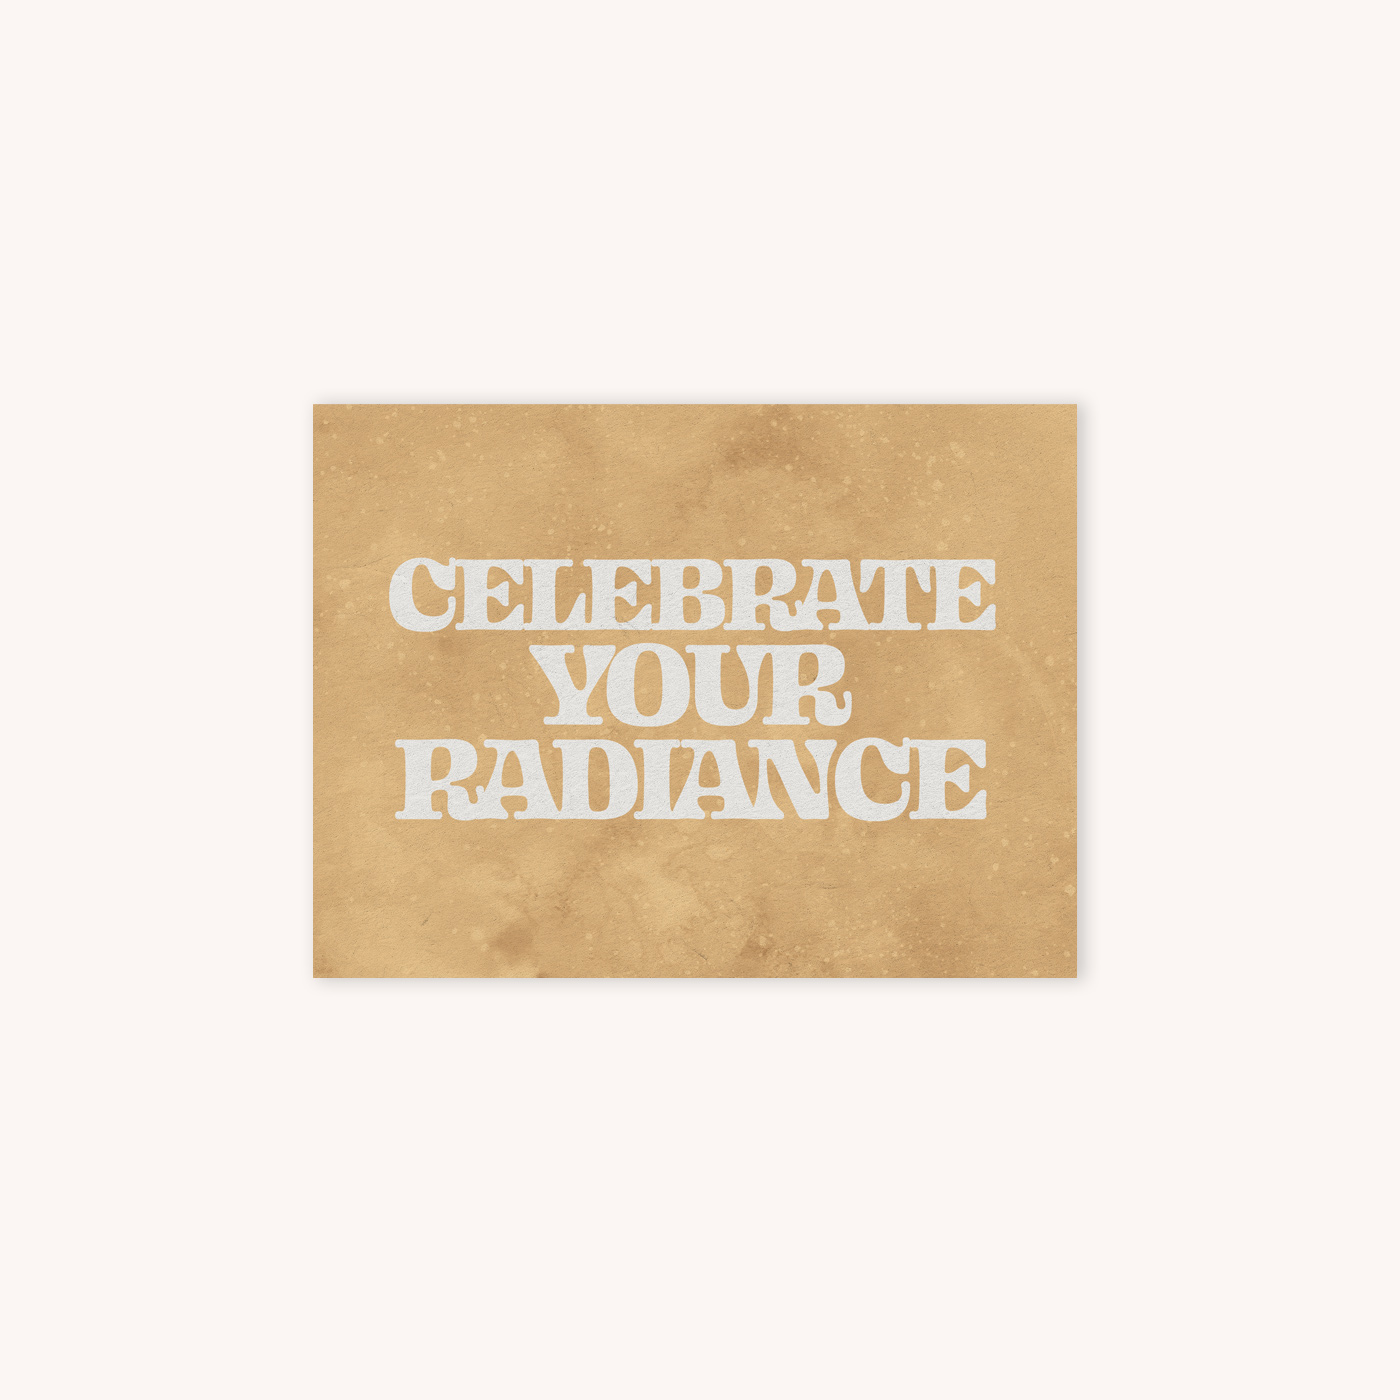 Card that says Celebrate Your Radiance with yellow abstract galaxy background